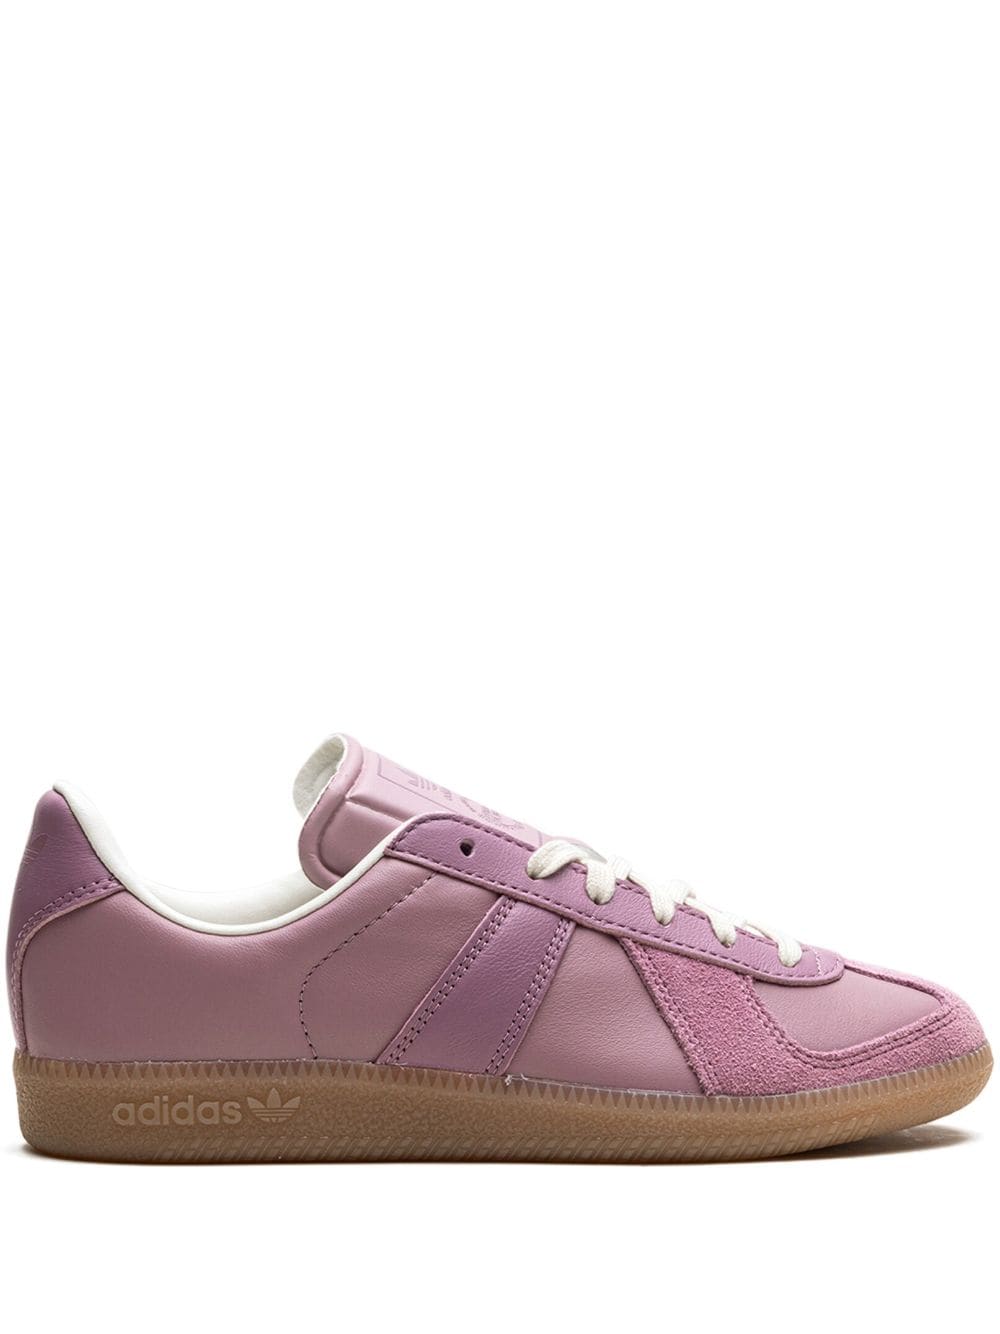 BW Army "Pink/Gum" sneakers